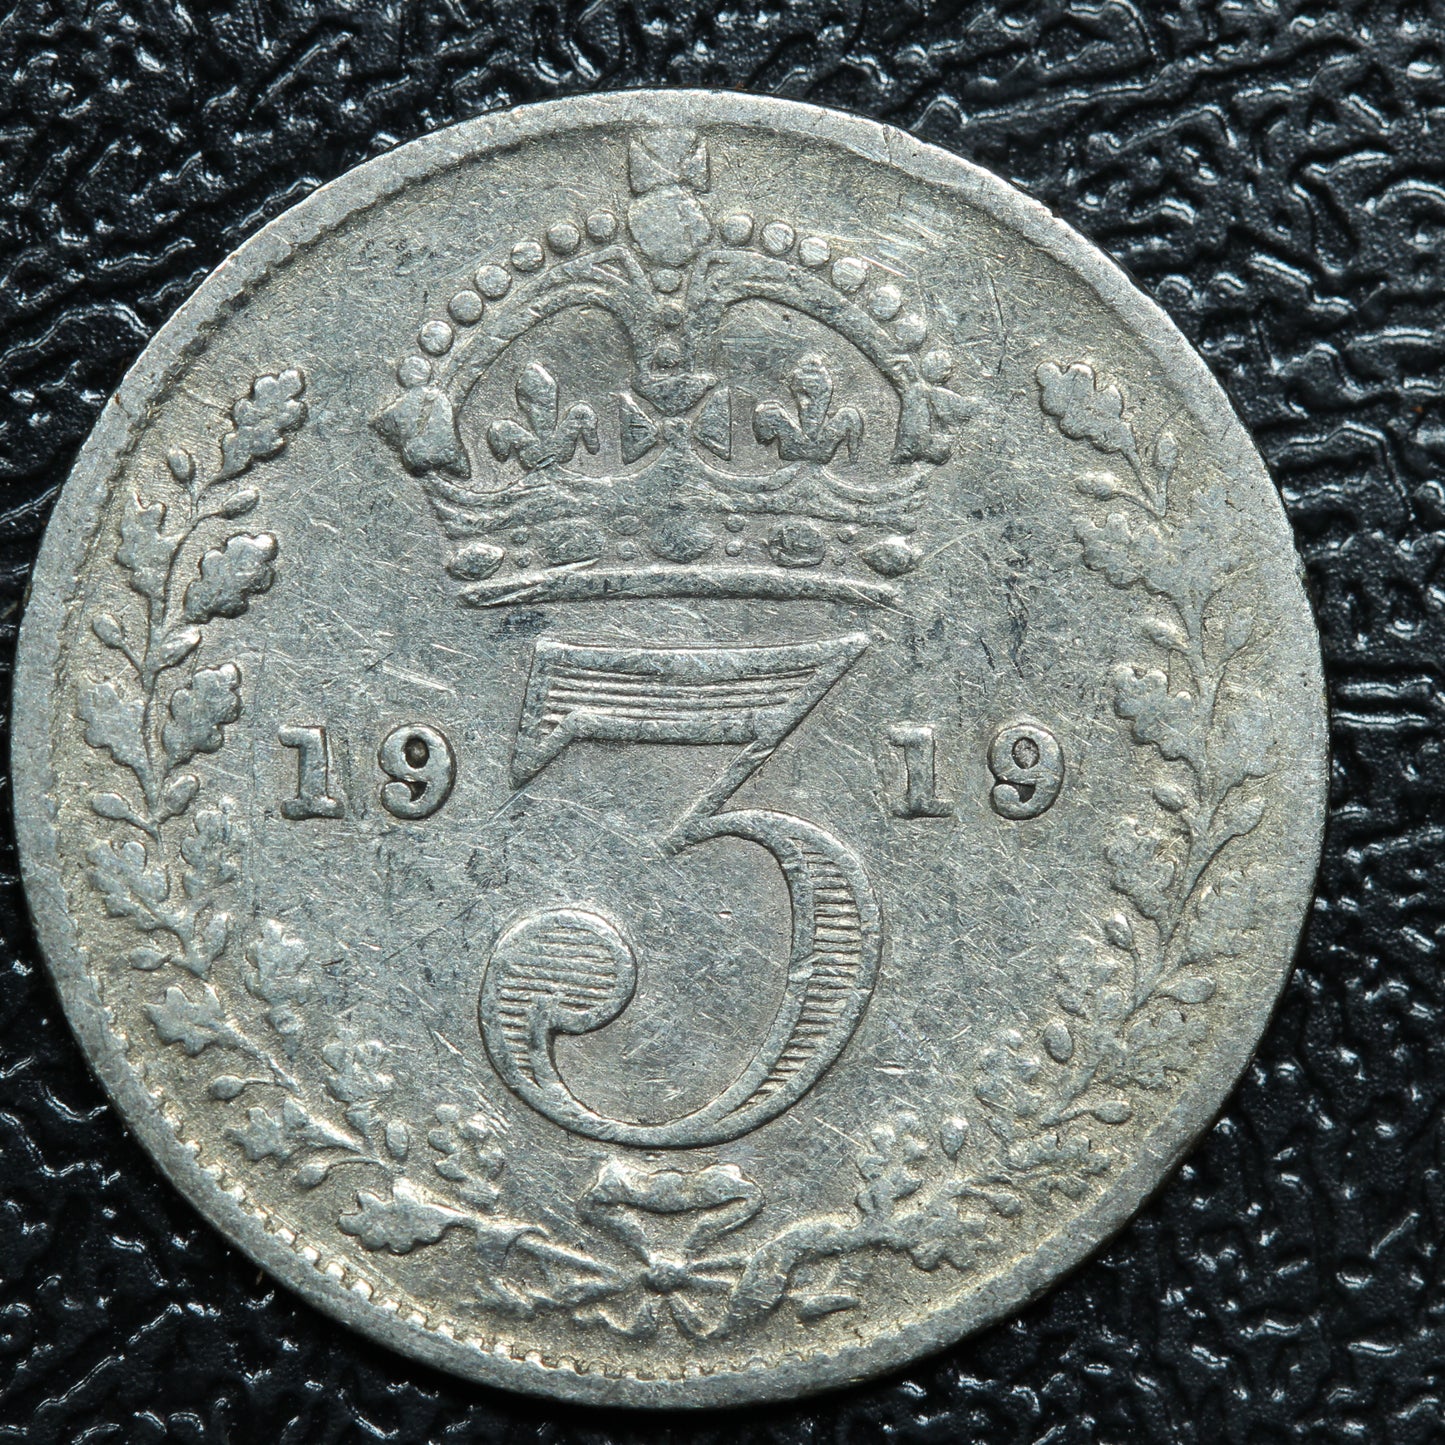 1919 Great Britain 3 Pence Threepence Silver Coin - KM# 813